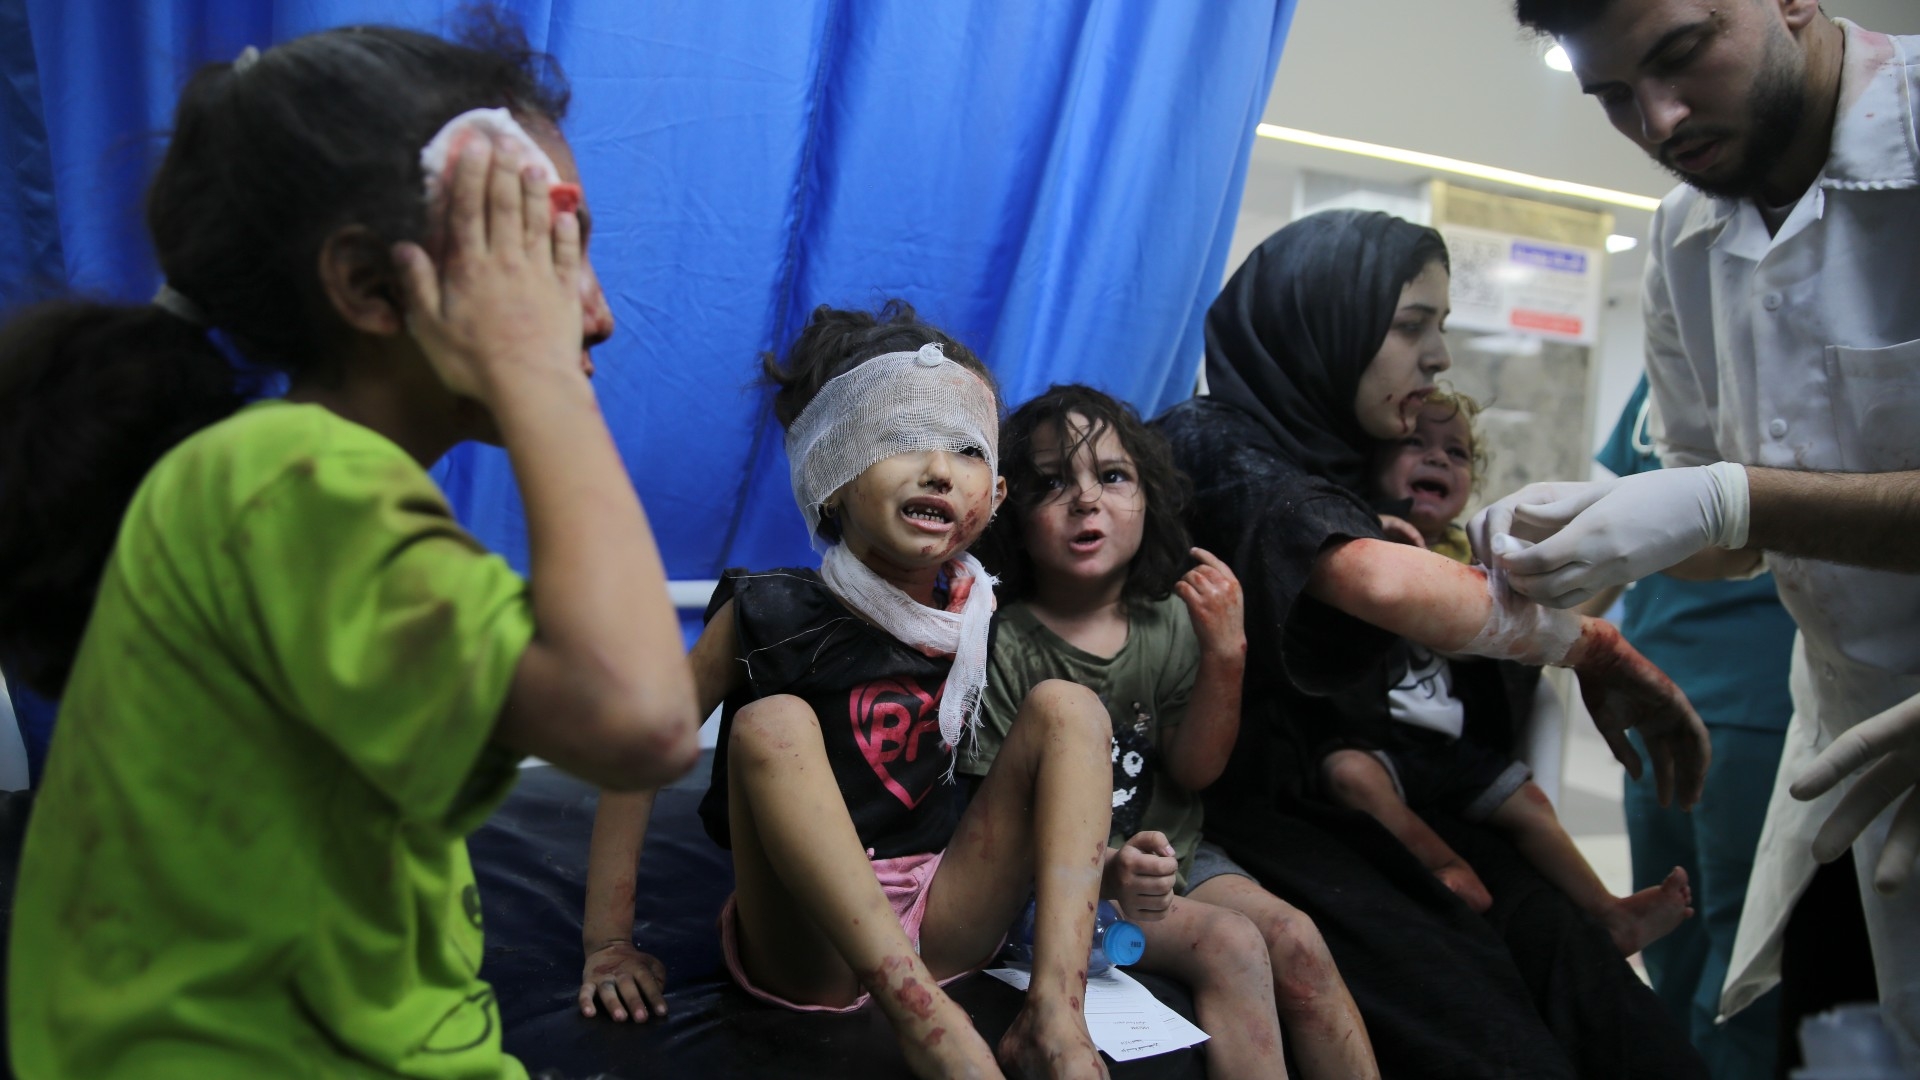 Palestinian children wounded in Israeli strikes are brought to Shifa Hospital in Gaza City on 11 October (AP)